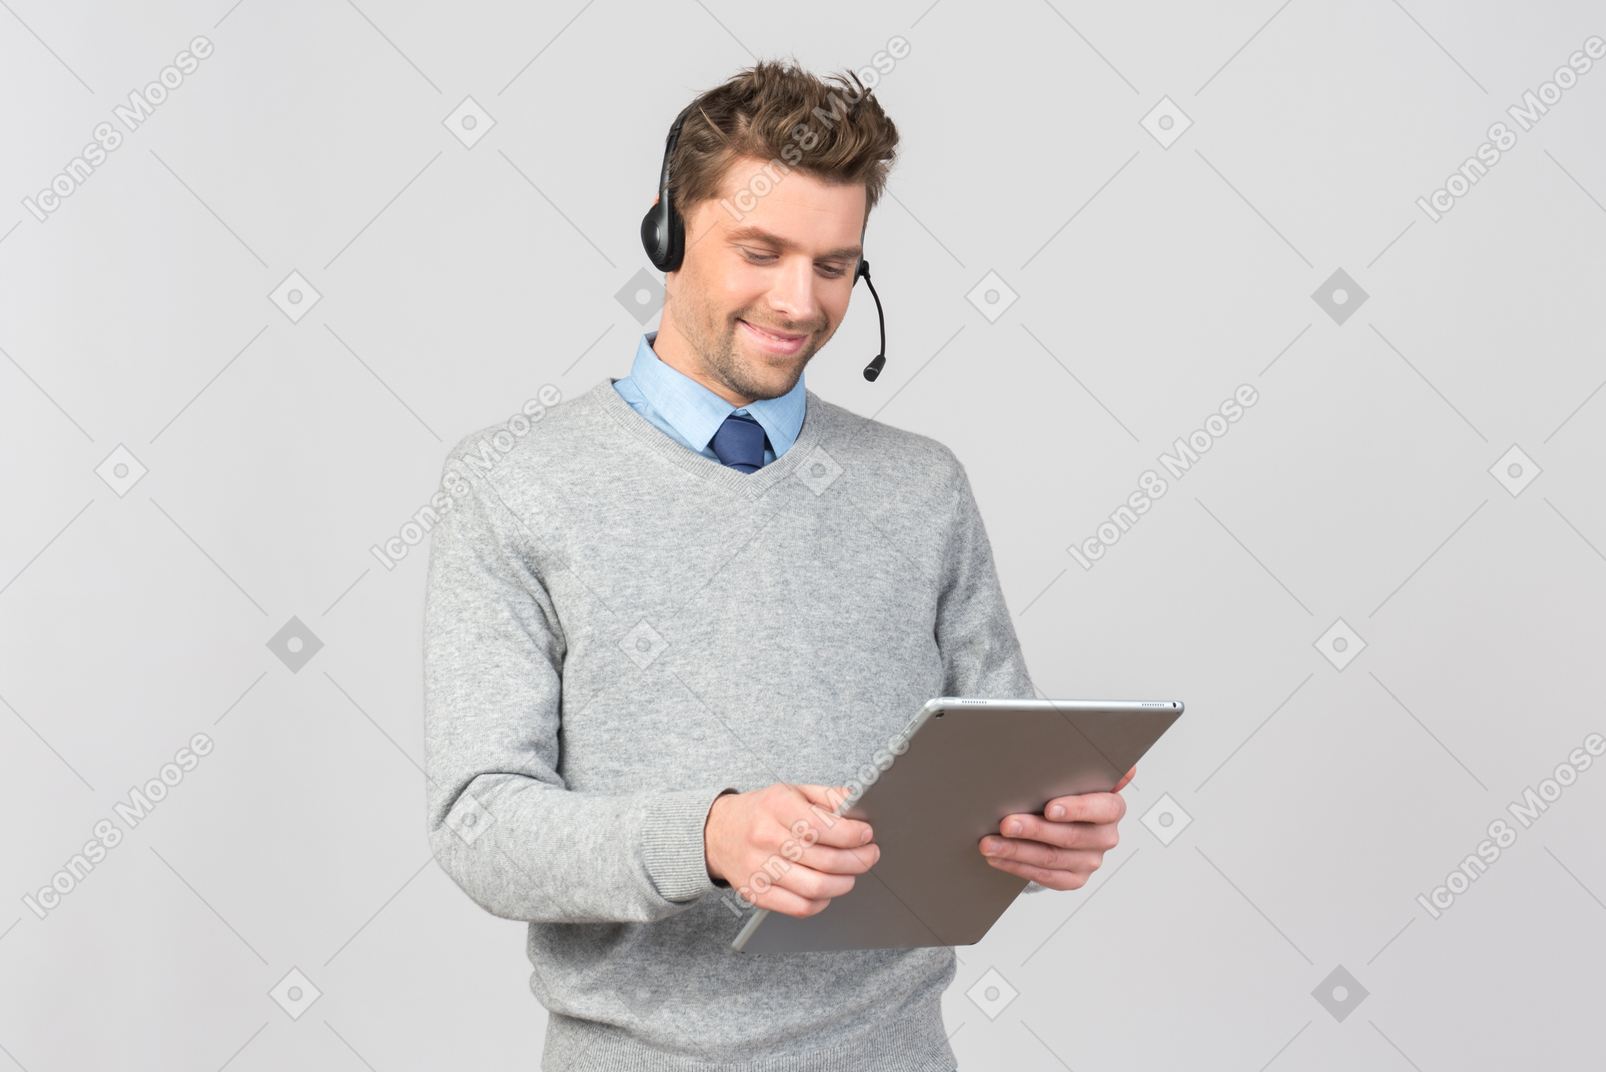 Call center agent working and holding folder